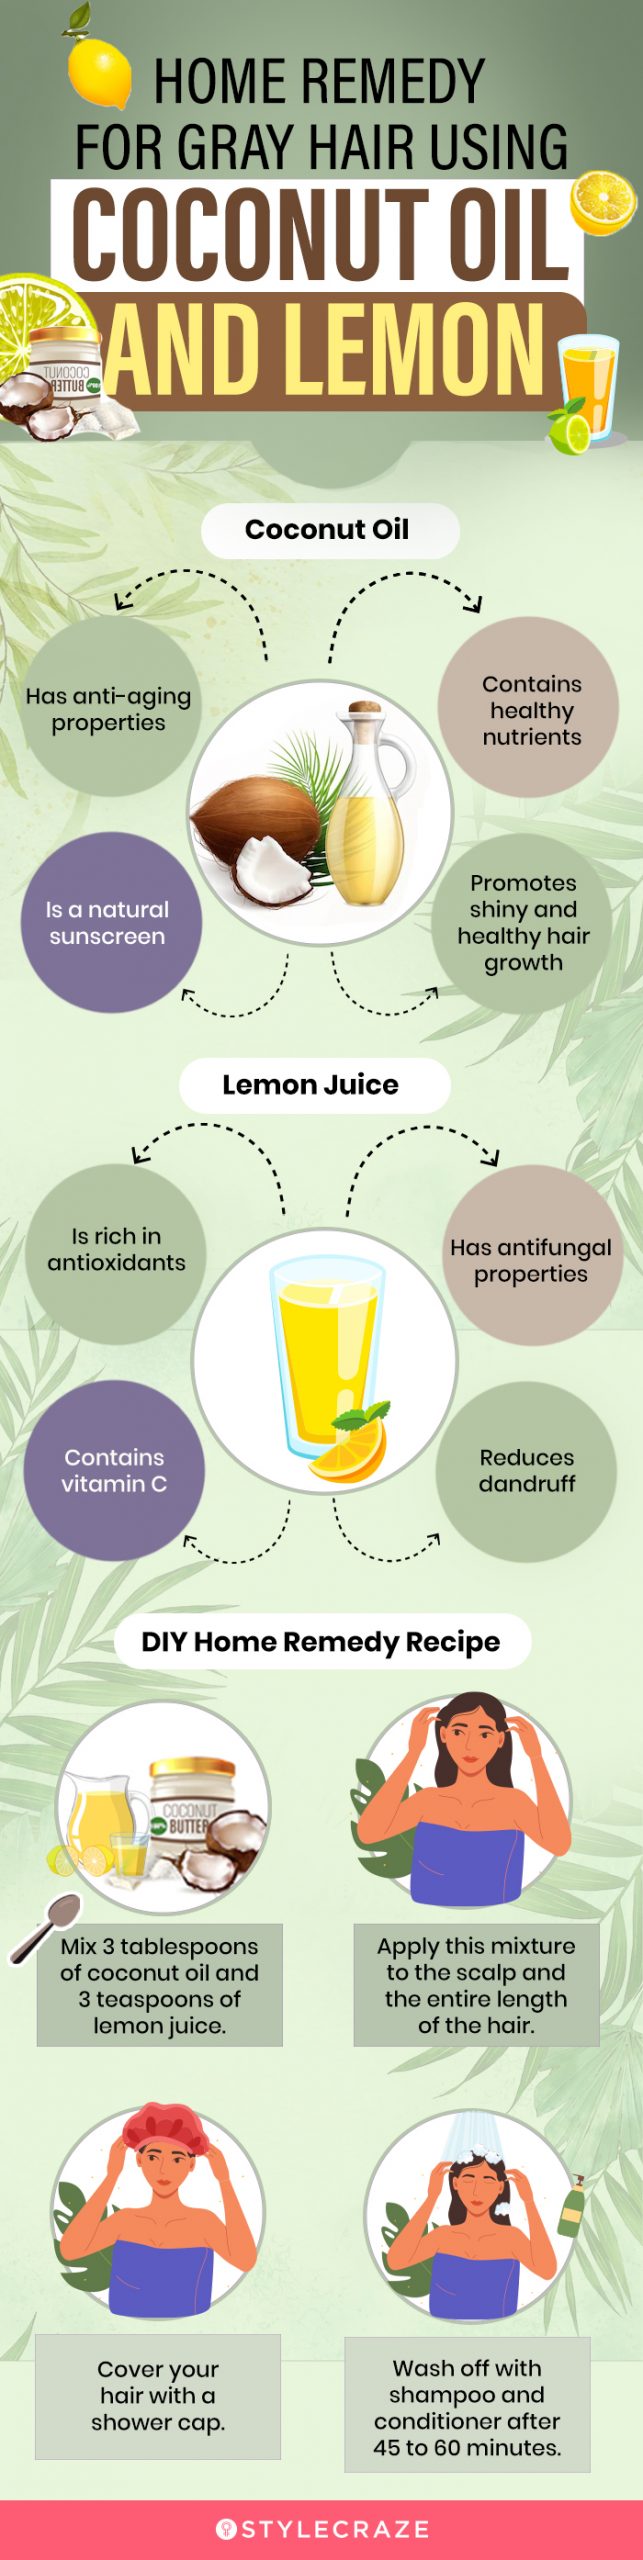 home remedy for grey hair using coconut oil and lemon (infographic)